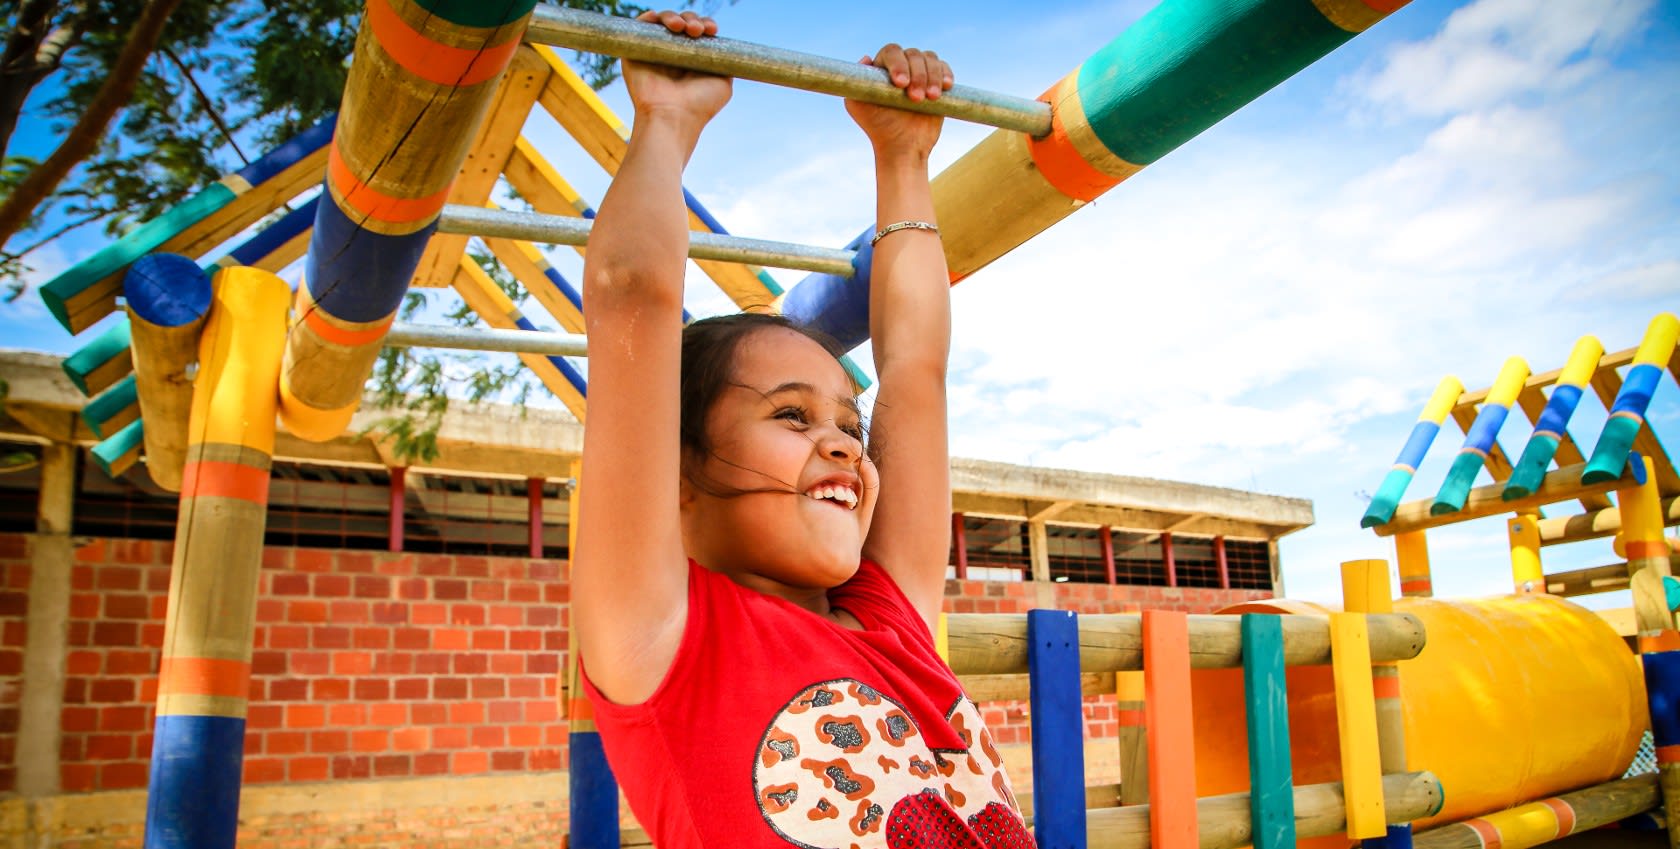 A girl playing at a playground, smiling happily.